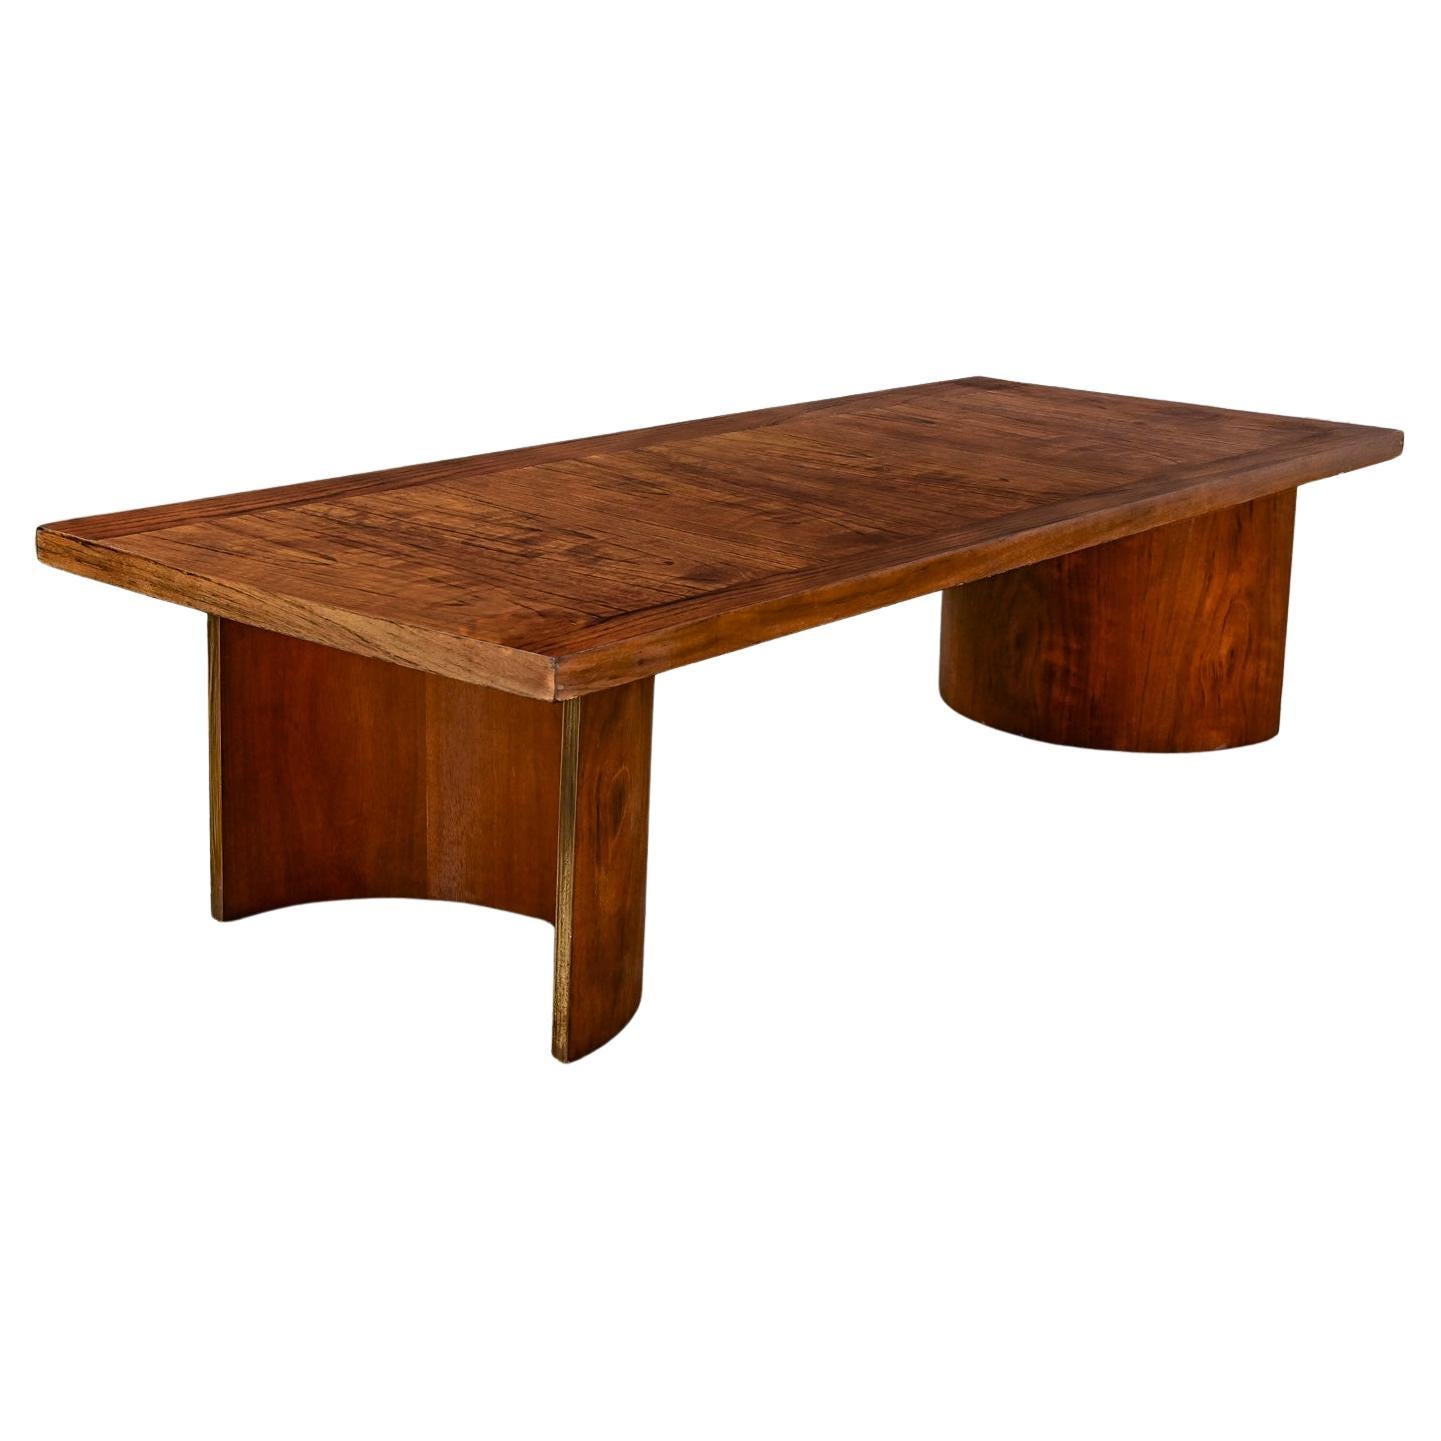 The Modernity Modernity Coffee Table Kroehler Rectangle Top Bentwood Curved Double U Base